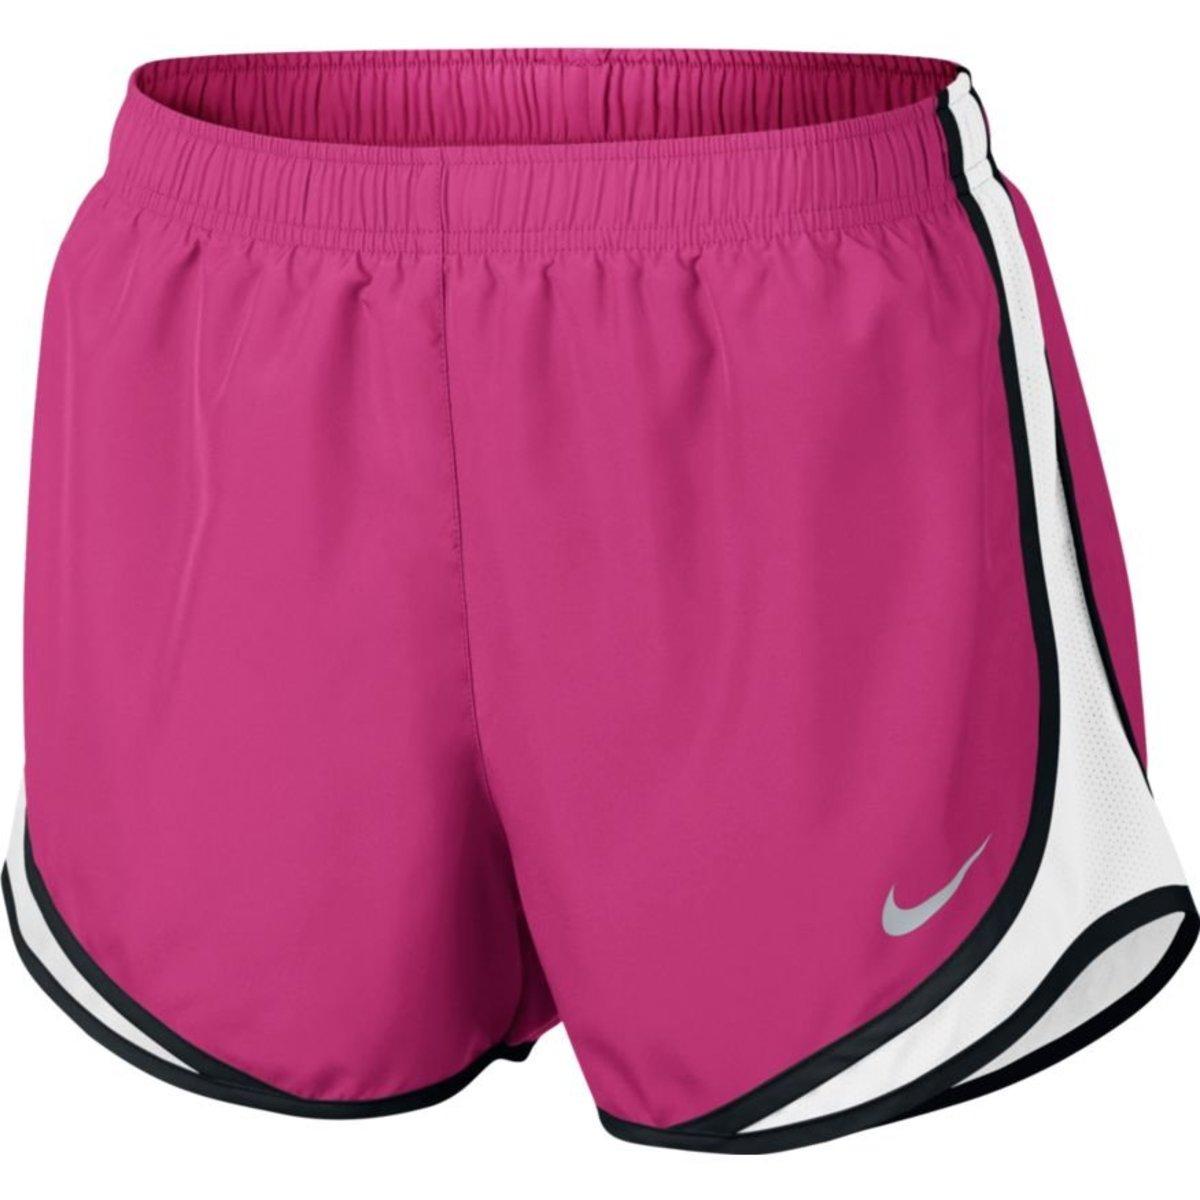 Nike Dry Tempo Running Short in Pink - Lyst